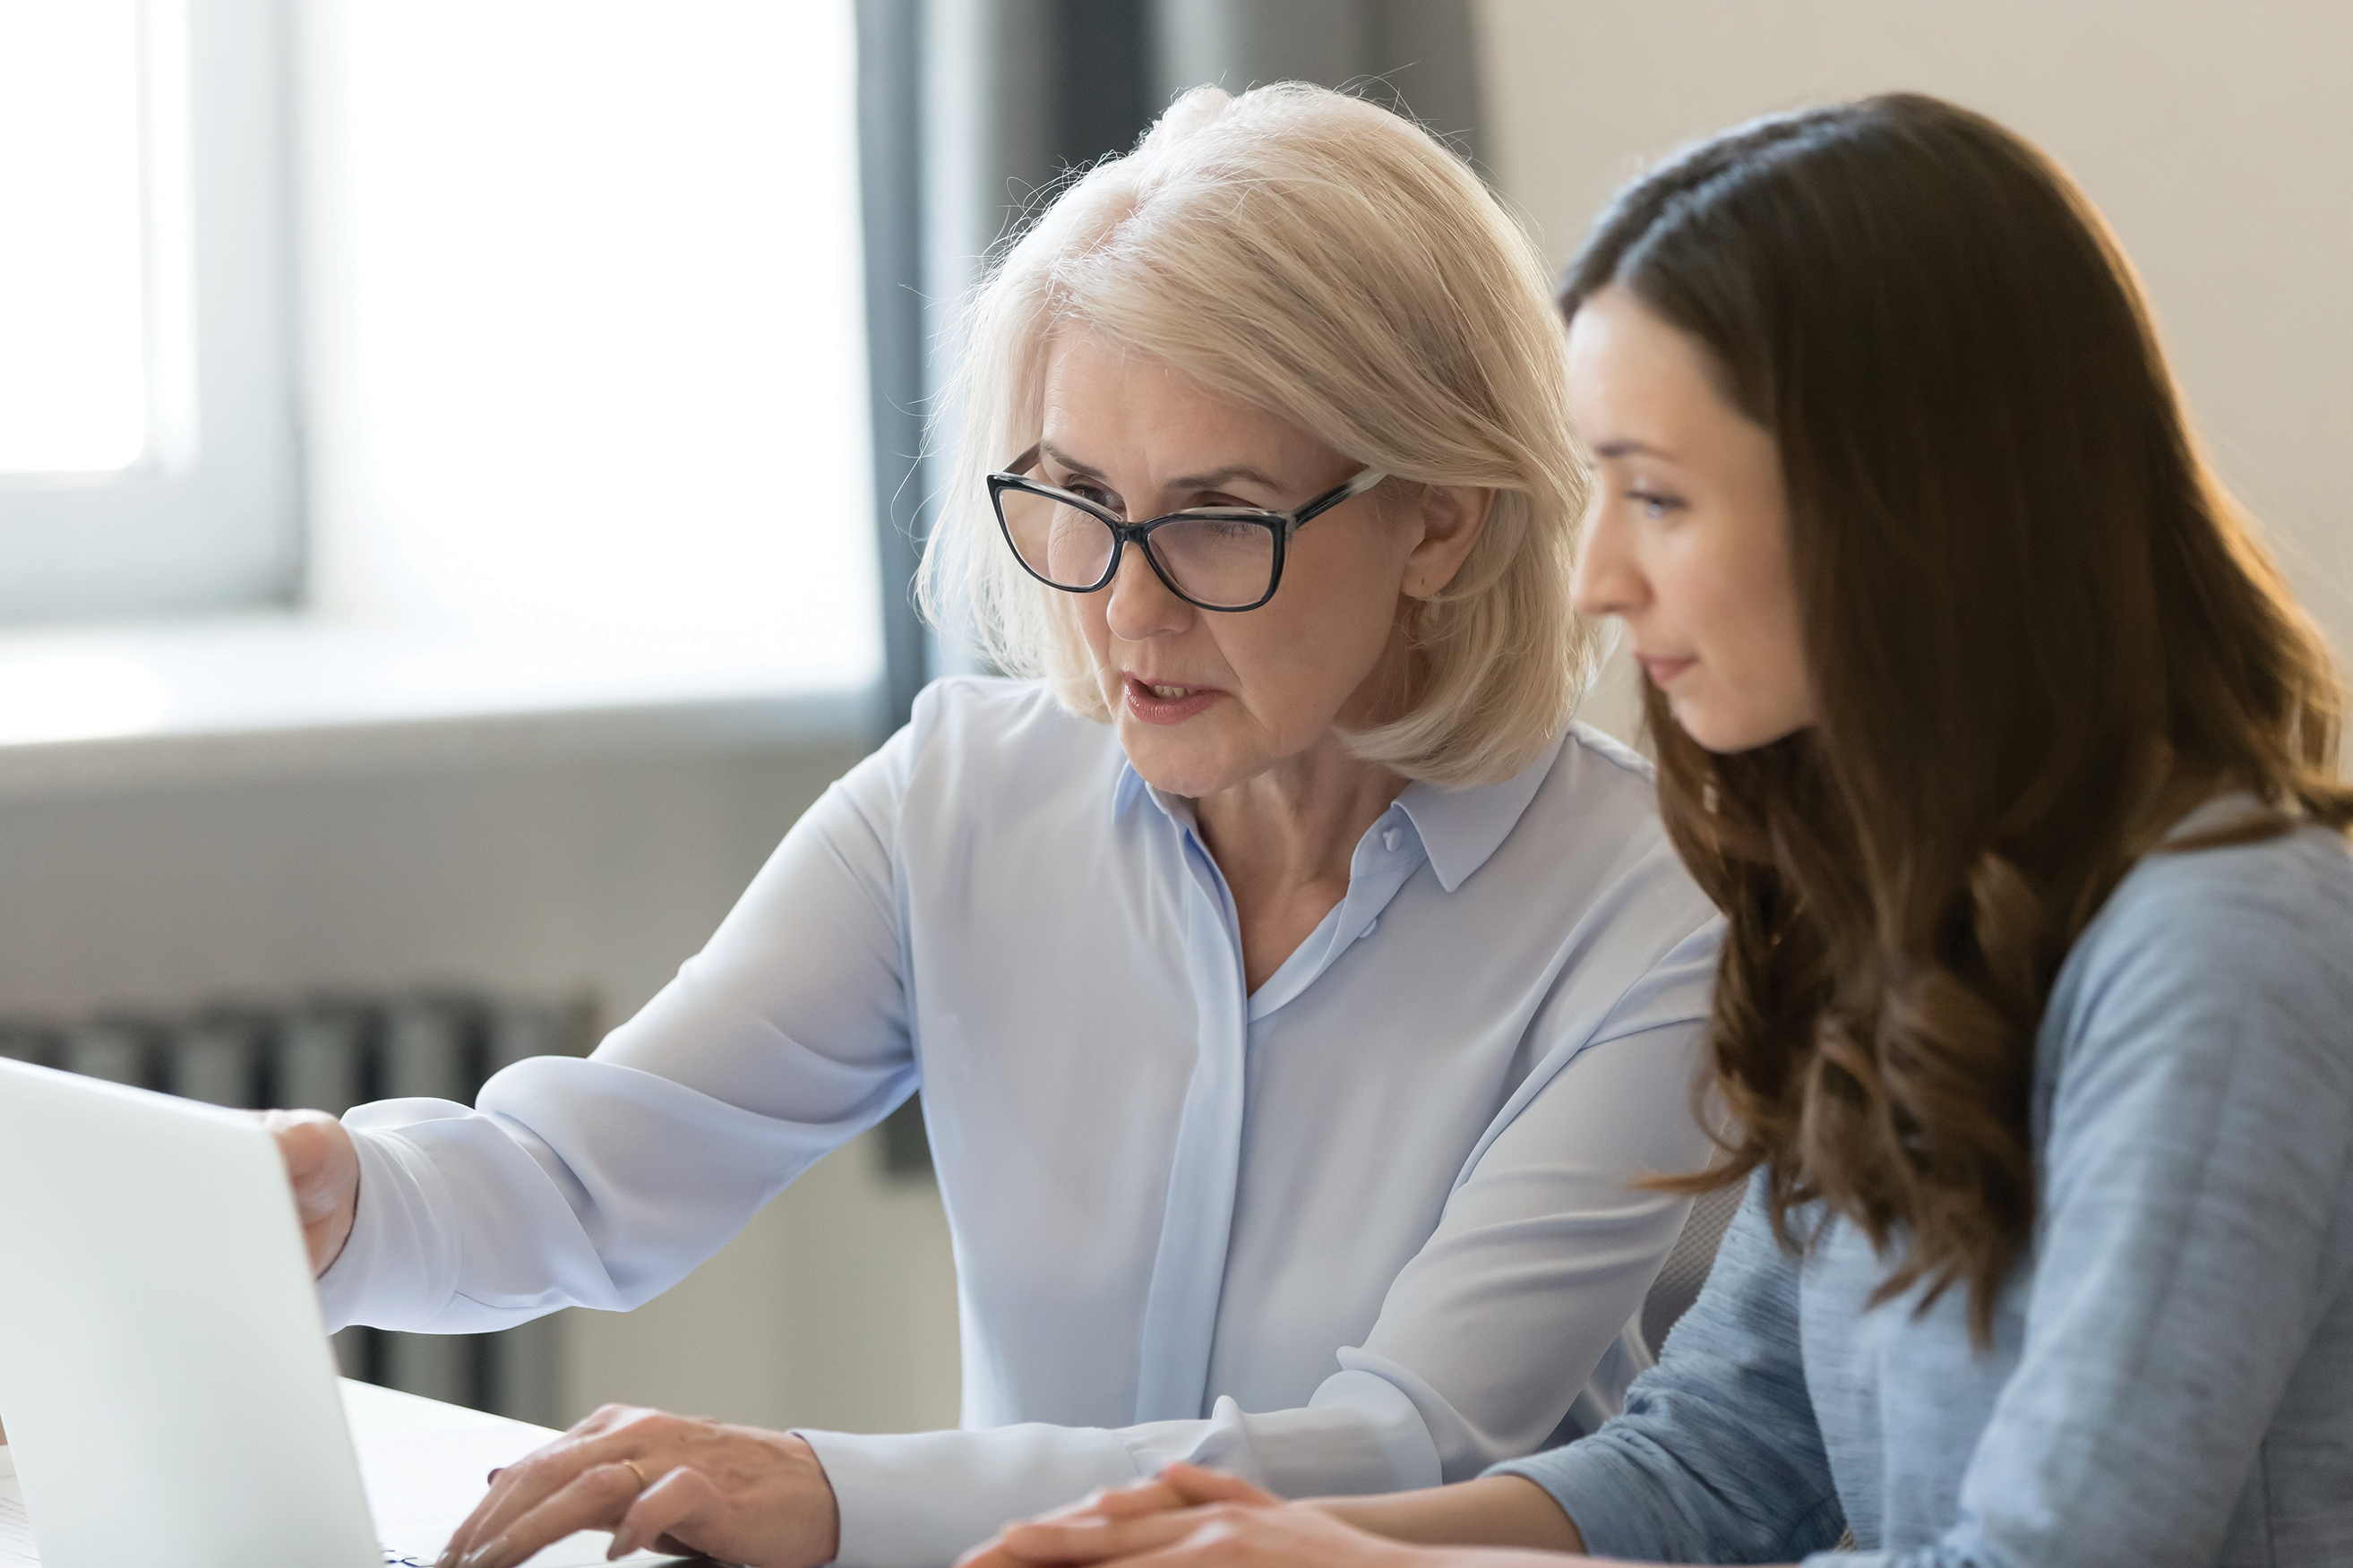 The role of data management in aged care